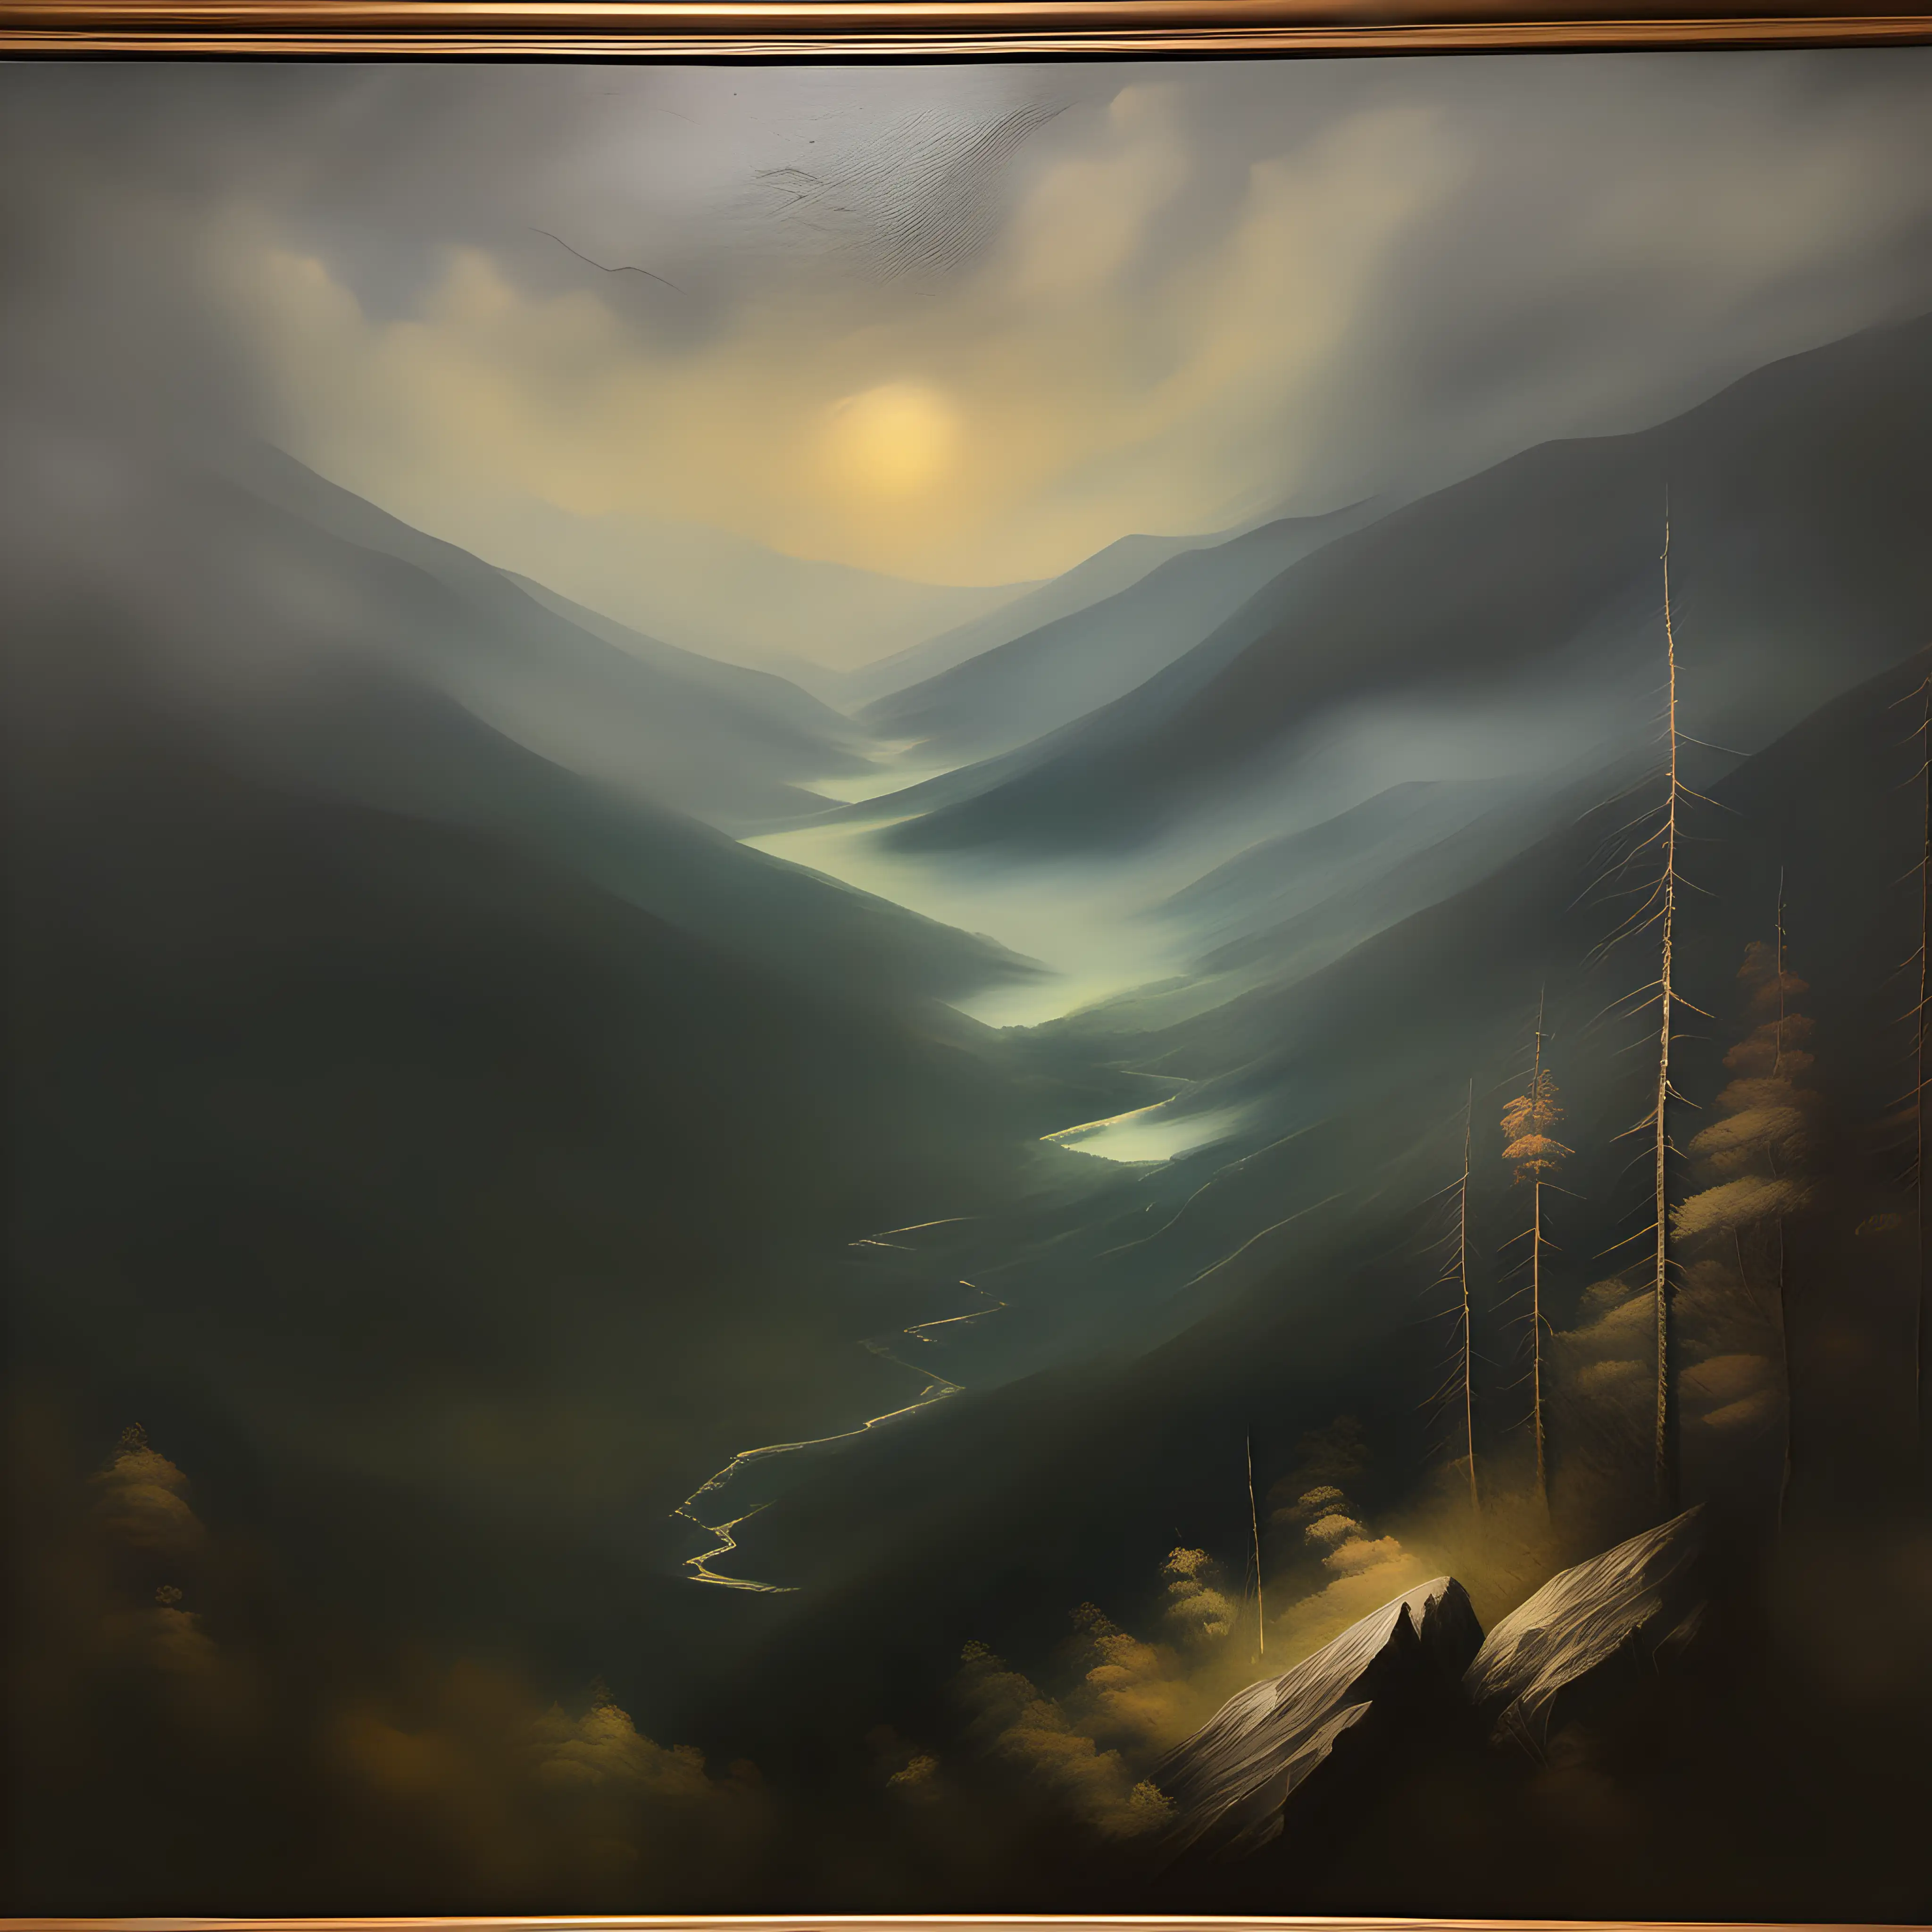 Vintage oil painting asthetic moody theme a view from a high mountain


